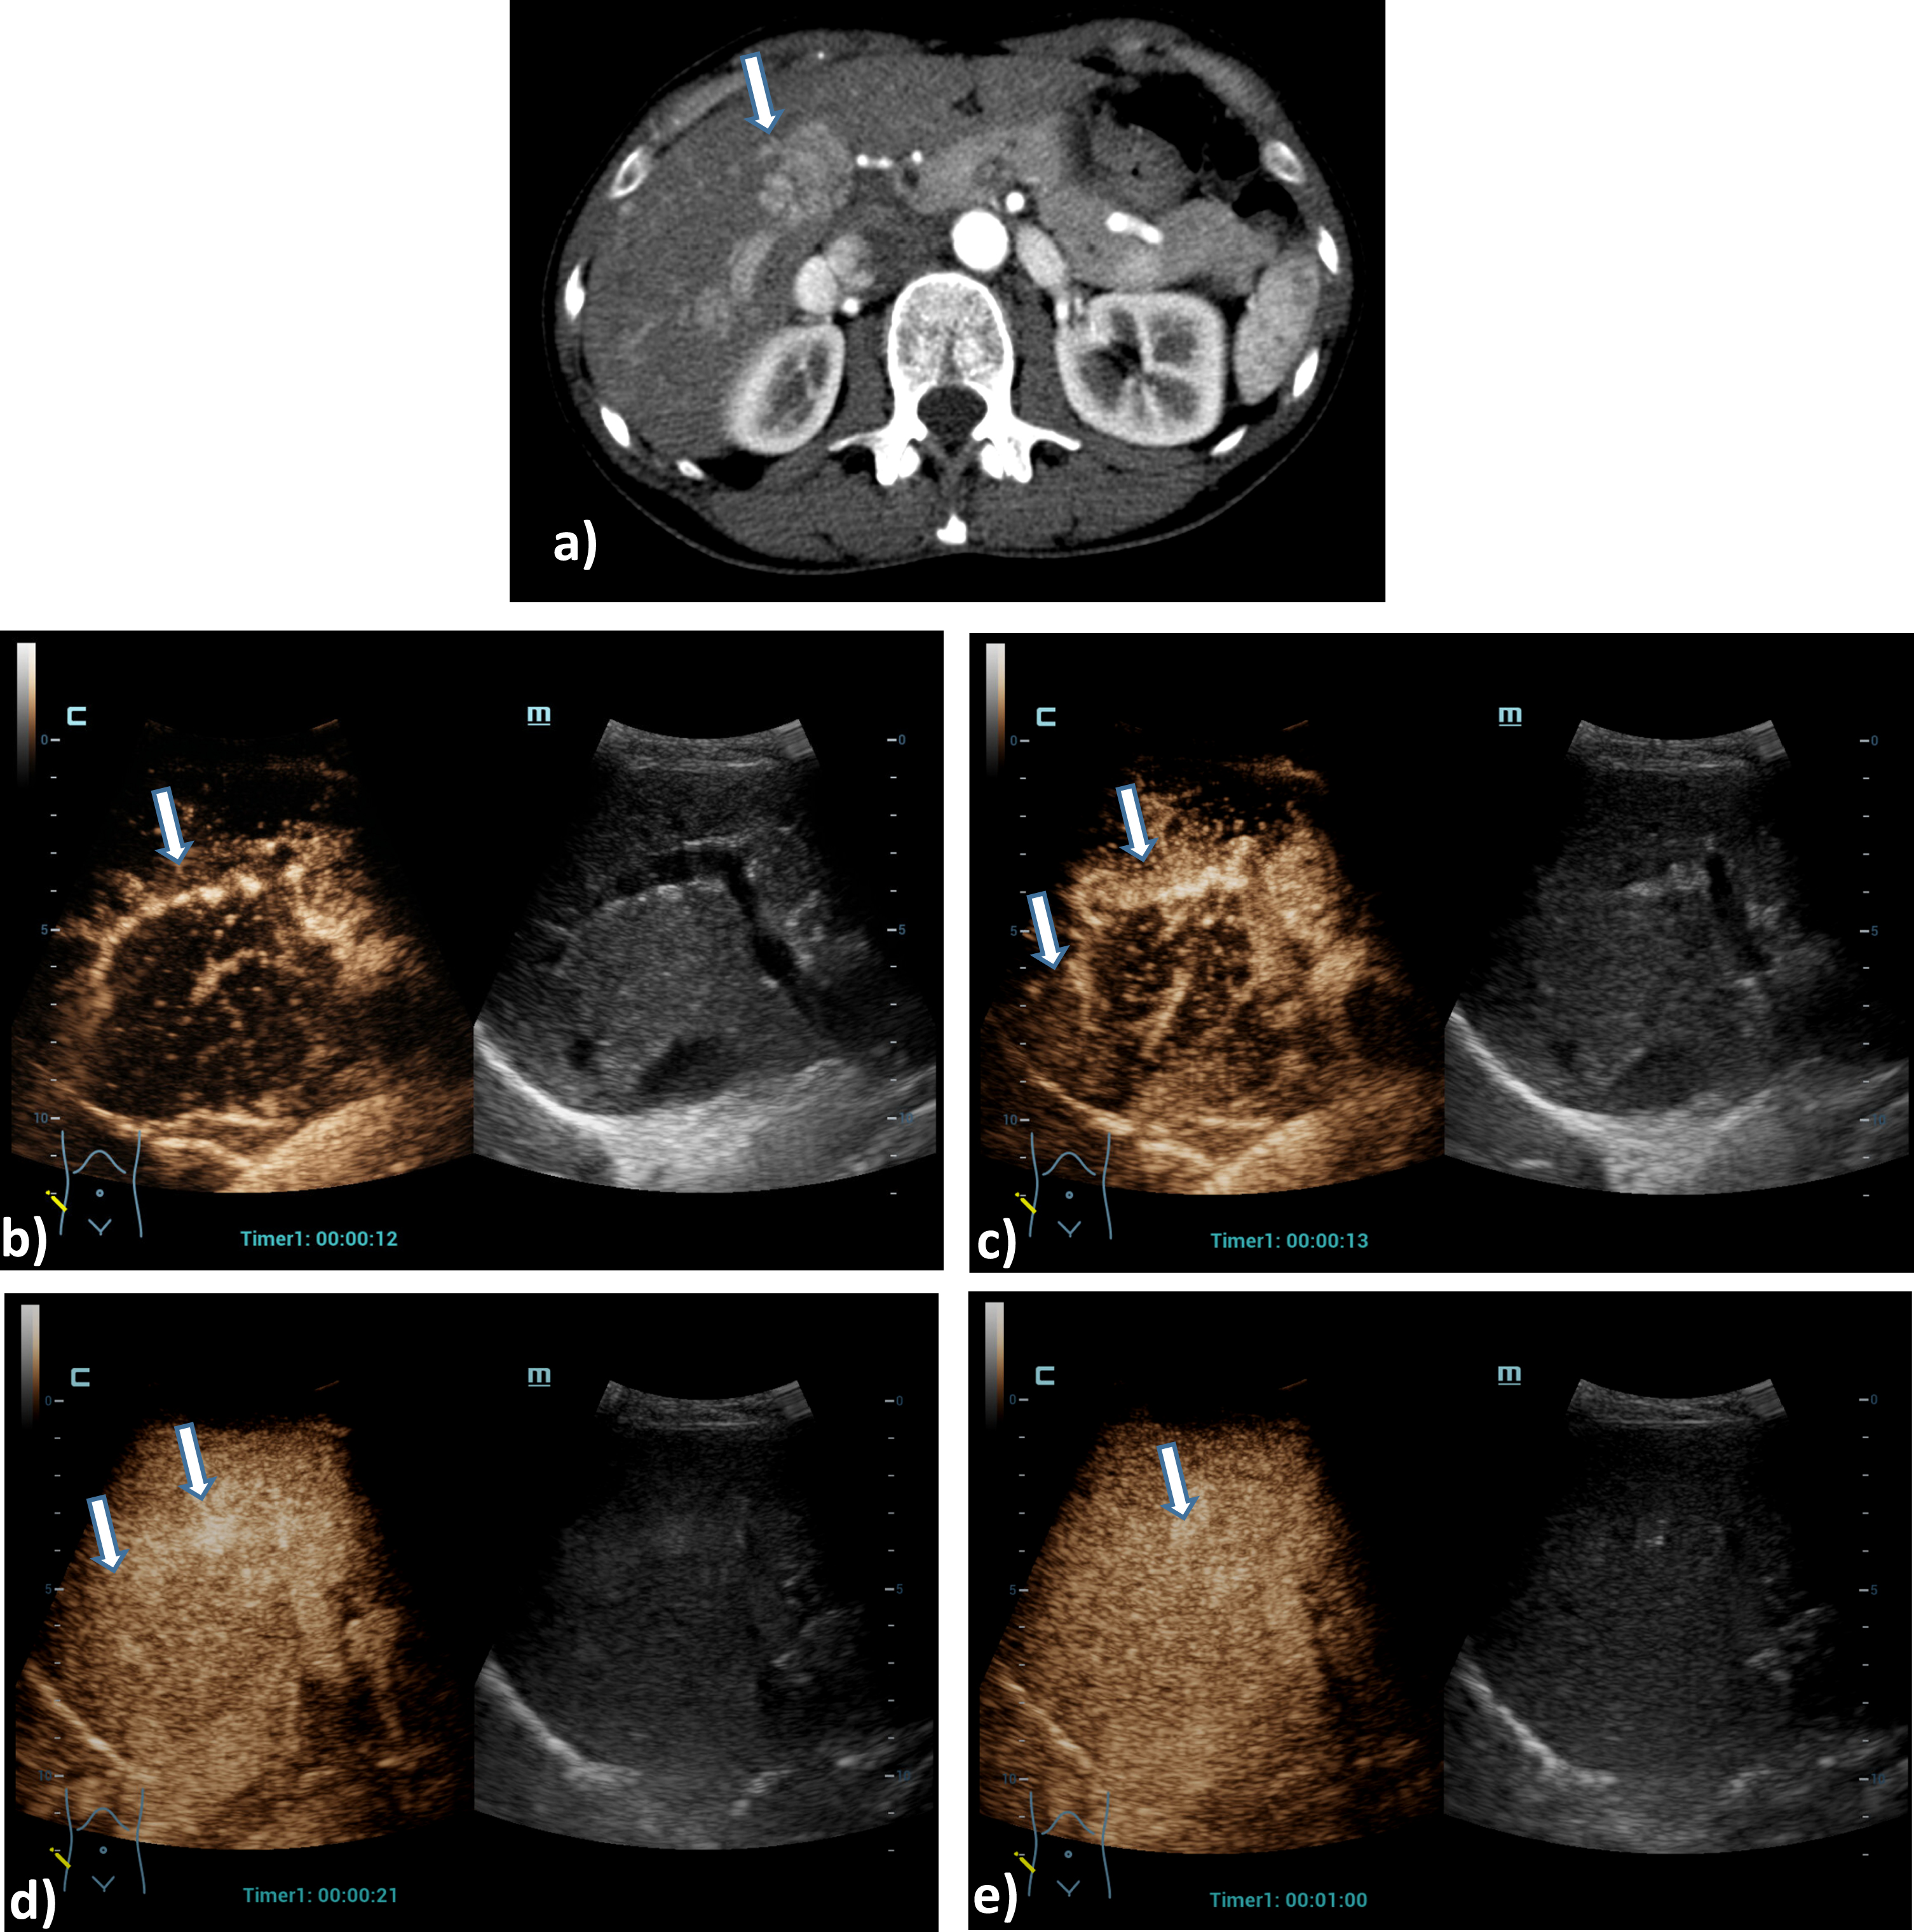 Case of a 54 years old female patient with Osler’s disease. CT scan of the lung shows irregular arterial hypervascularization of the central liver (a), after bolus injection of 1.5 ml ultrasound contrast agent HiFR-CEUS shows during early arterial phase (b), arterial phase (c), late arterial phase irregular dilatation of the hepatica artery (arrow) and hyperenhancement of hemangiomas (d). Late phase of HiFR-CEUS after 1 min shows homogenous contrast of the liver parenchyma without wash out (e).